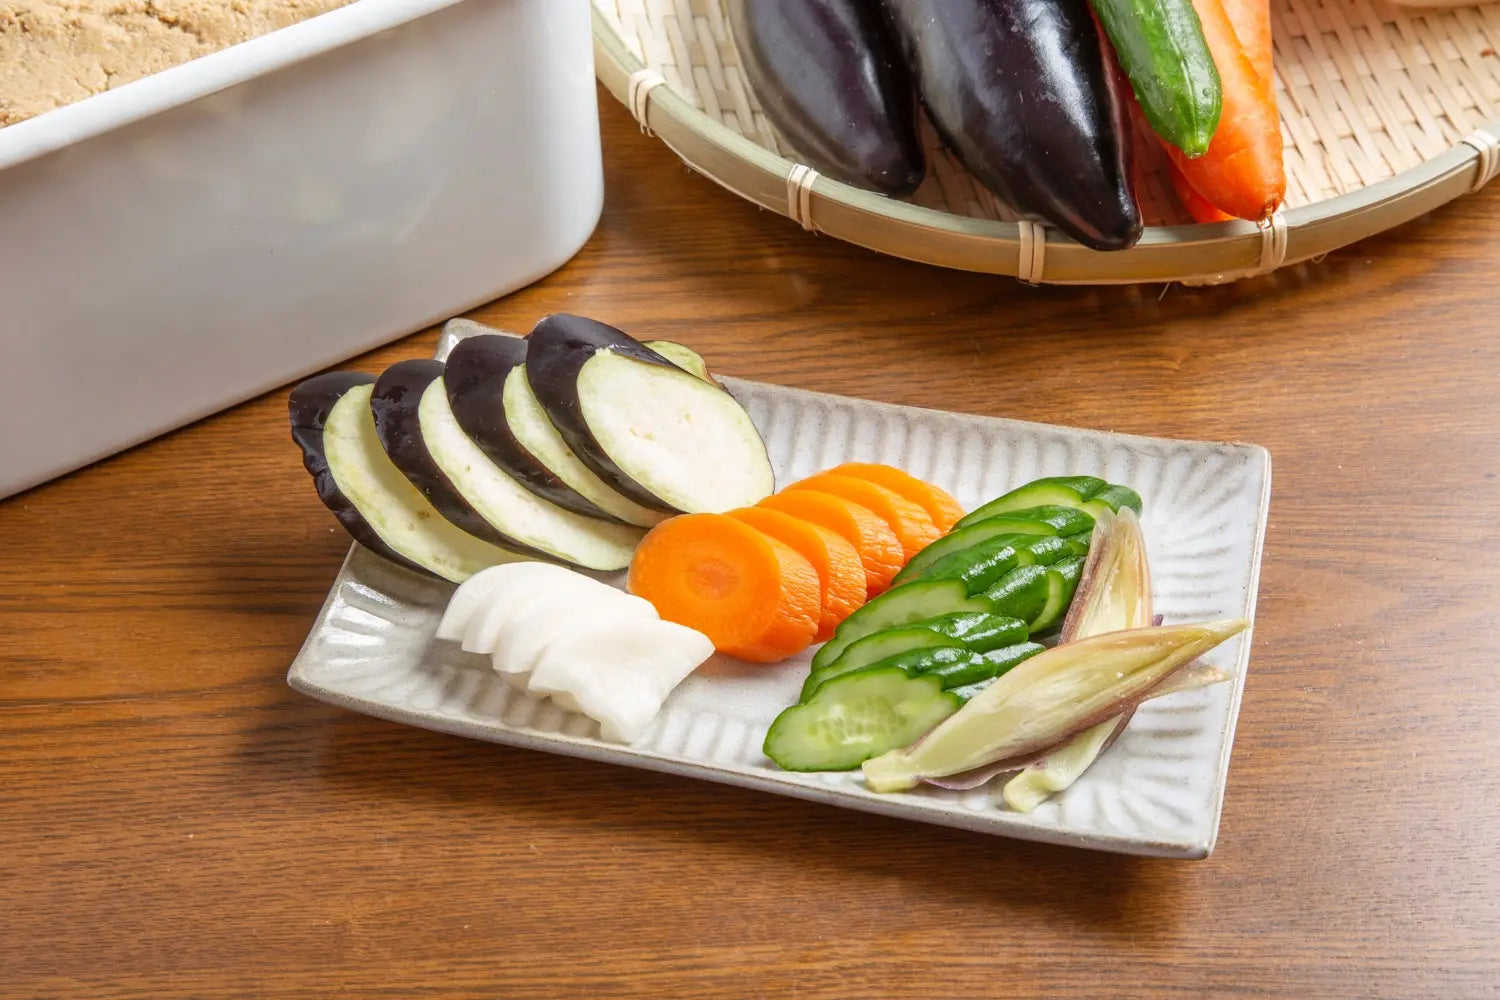 Vegetables pickled via nukazuke are known for being both soft and crunchy.